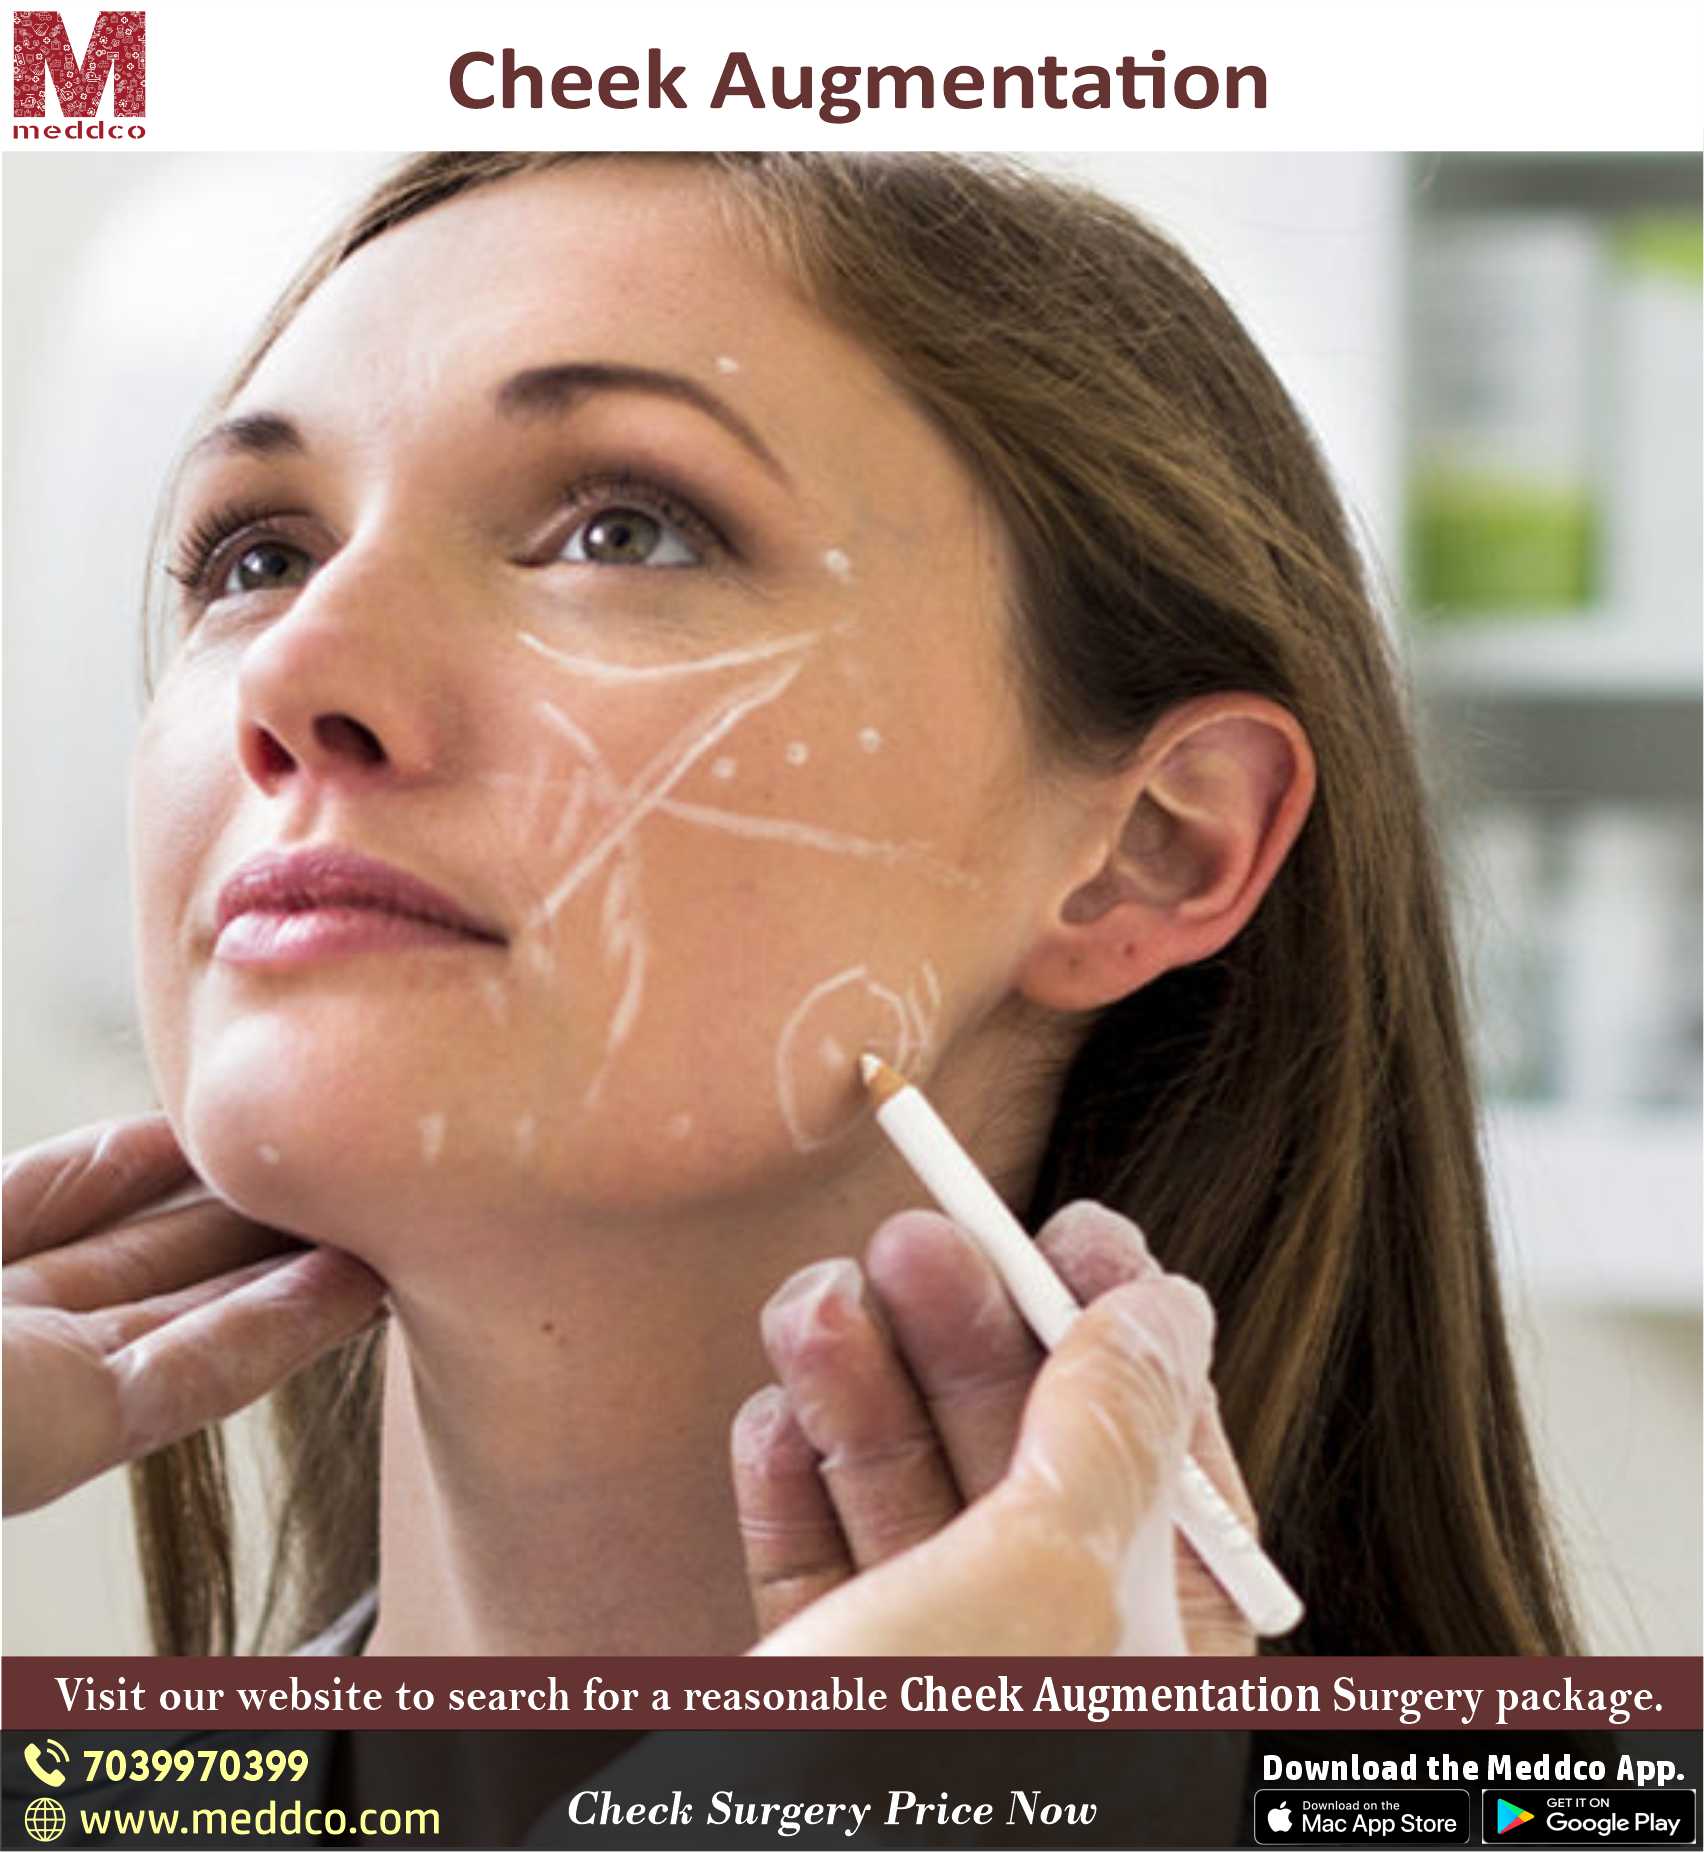 All you need to know about Cheek Augmentation